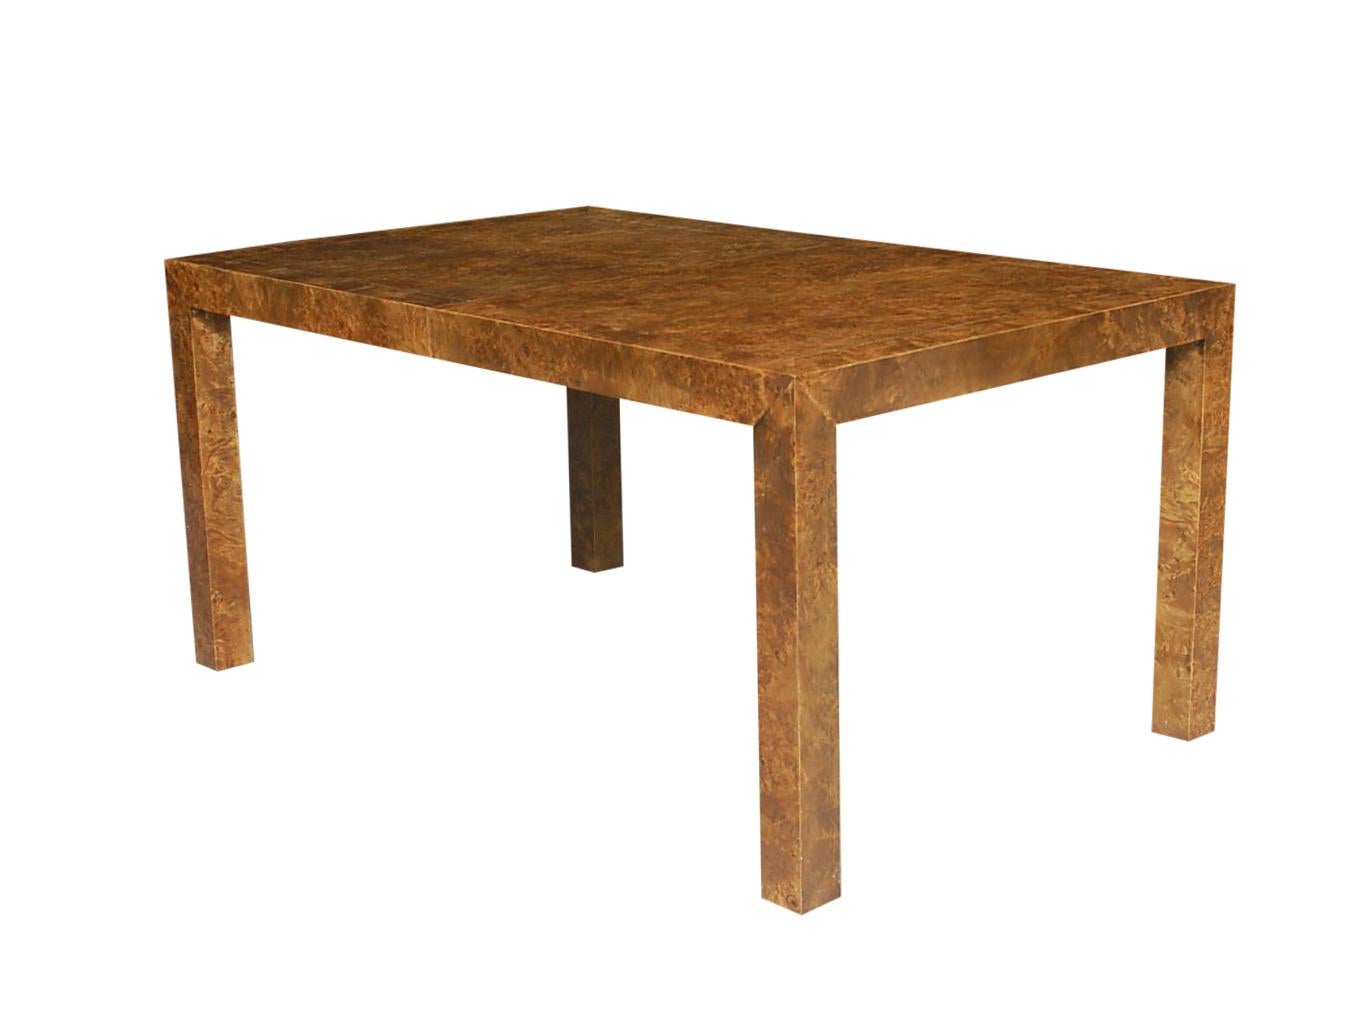 A classic, simple, and modern design for the 1960s. This table features beautiful burl wood veneer on top of solid wood construction. Table comes with two 18 inch extension leaves as shown.